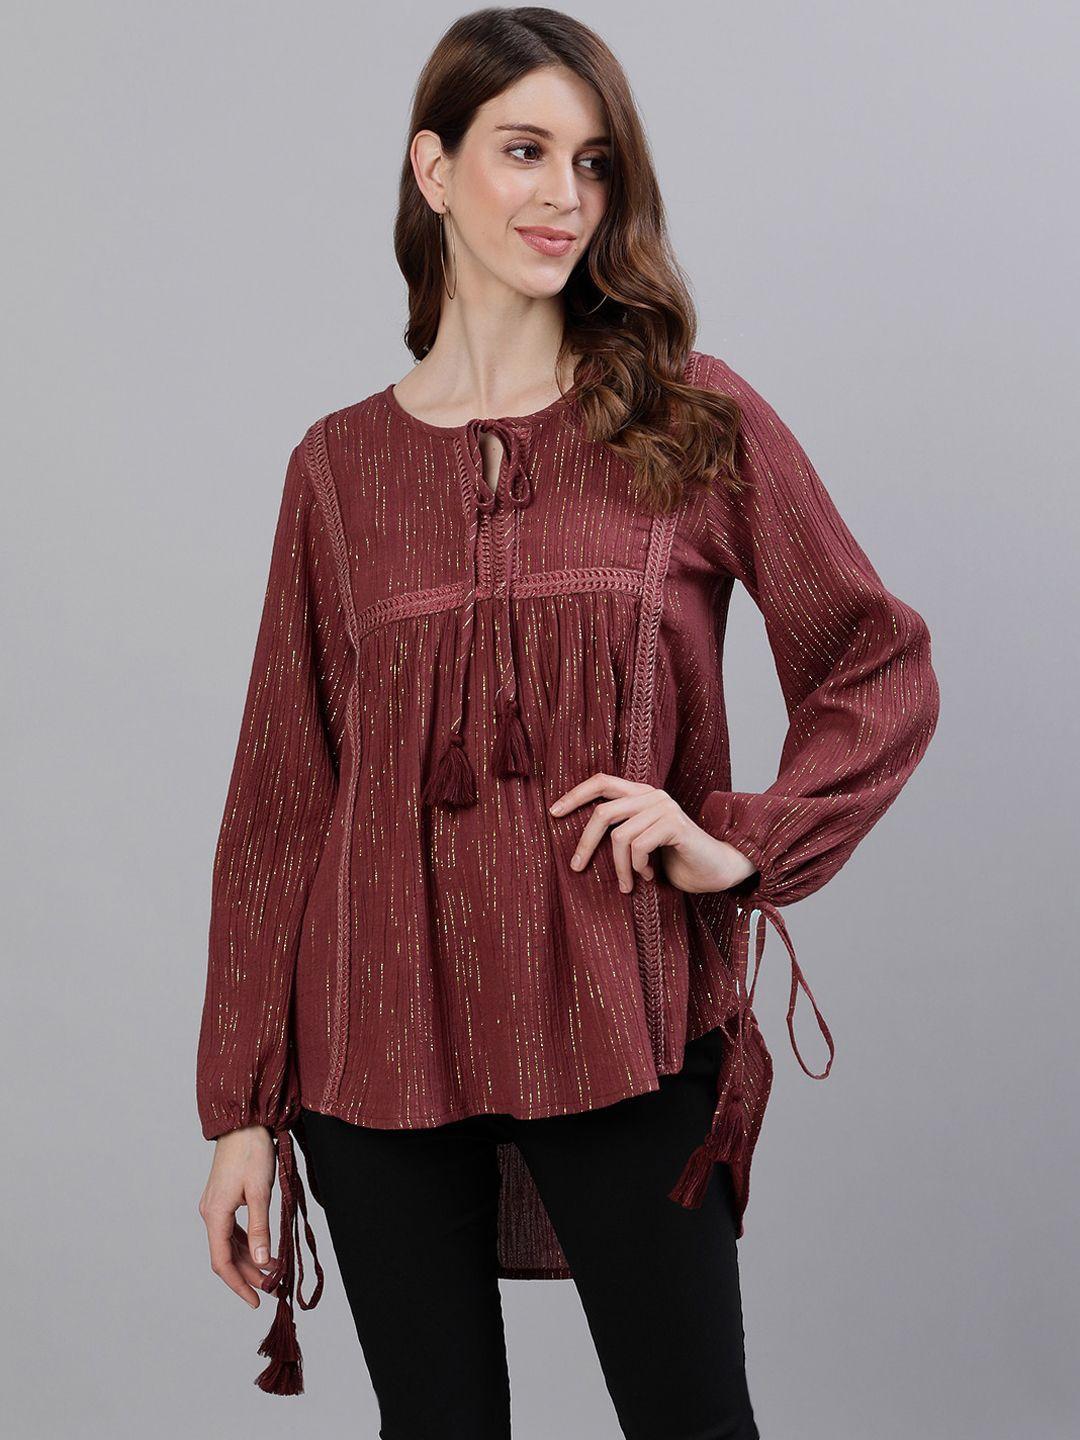 Ishin Maroon Striped Tie-Up Neck Puff Sleeves High-Low Top